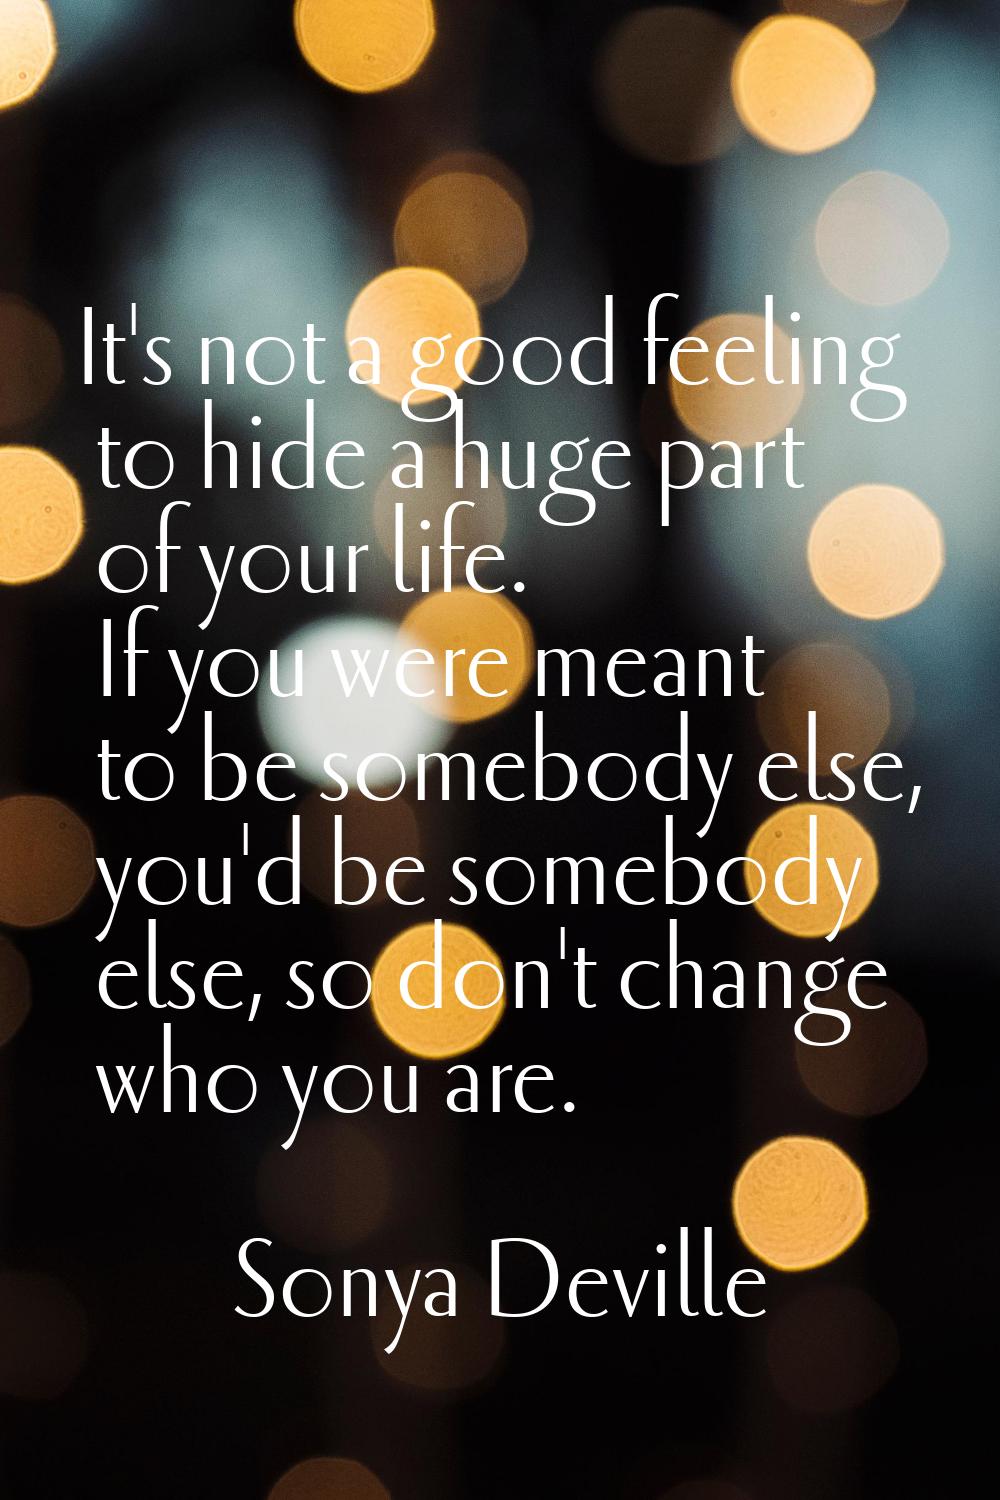 It's not a good feeling to hide a huge part of your life. If you were meant to be somebody else, yo